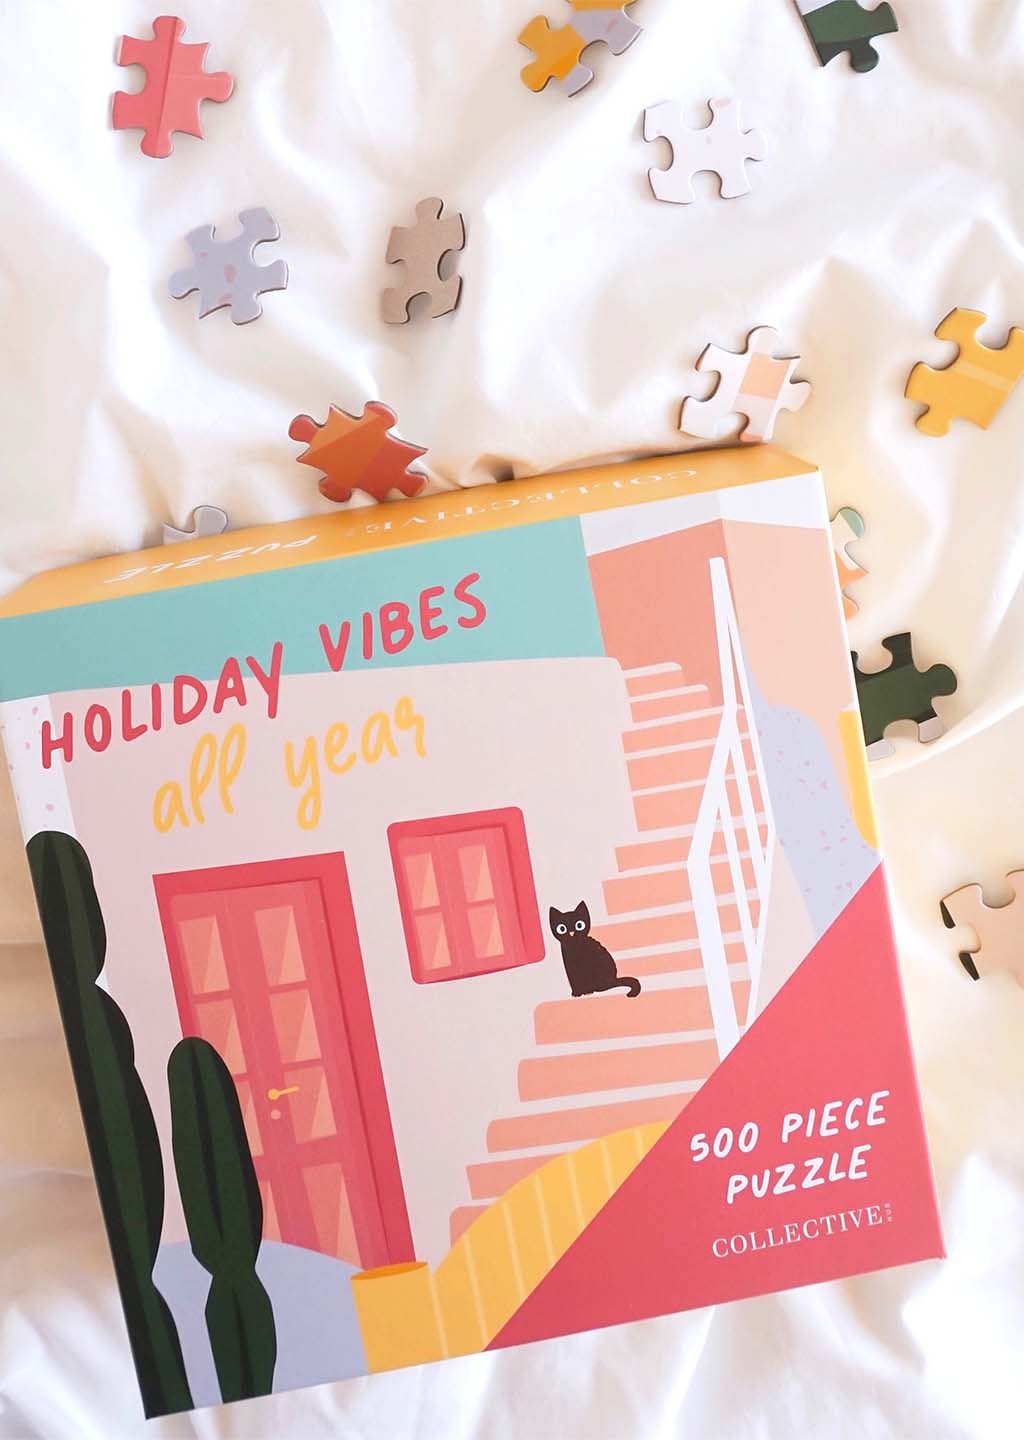 Puzzle - Holiday Vibes All Year